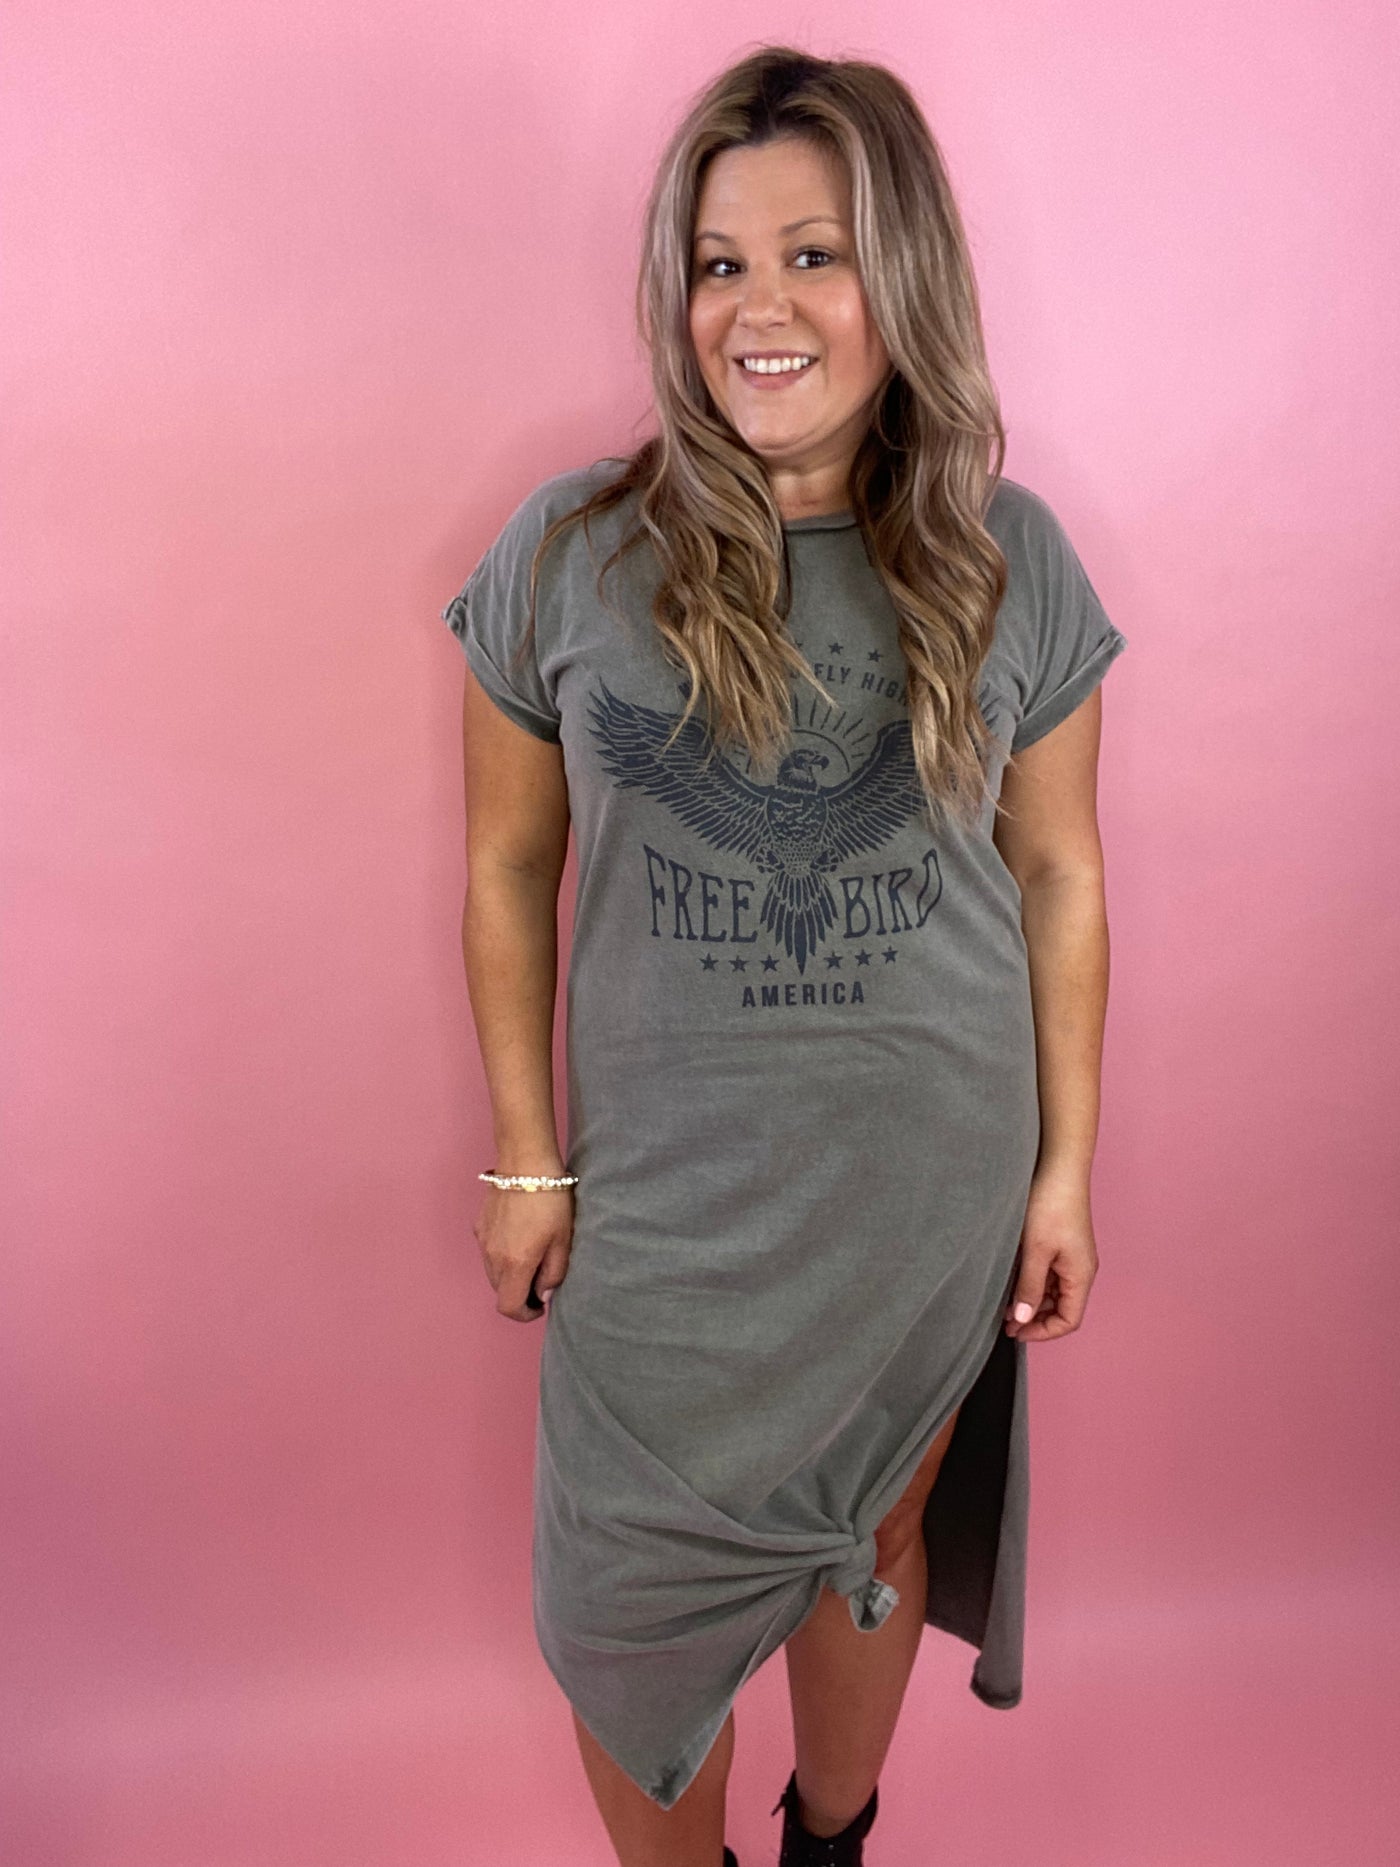 Won't You Fly High Graphic Free Bird T-Shirt Dress In Olive